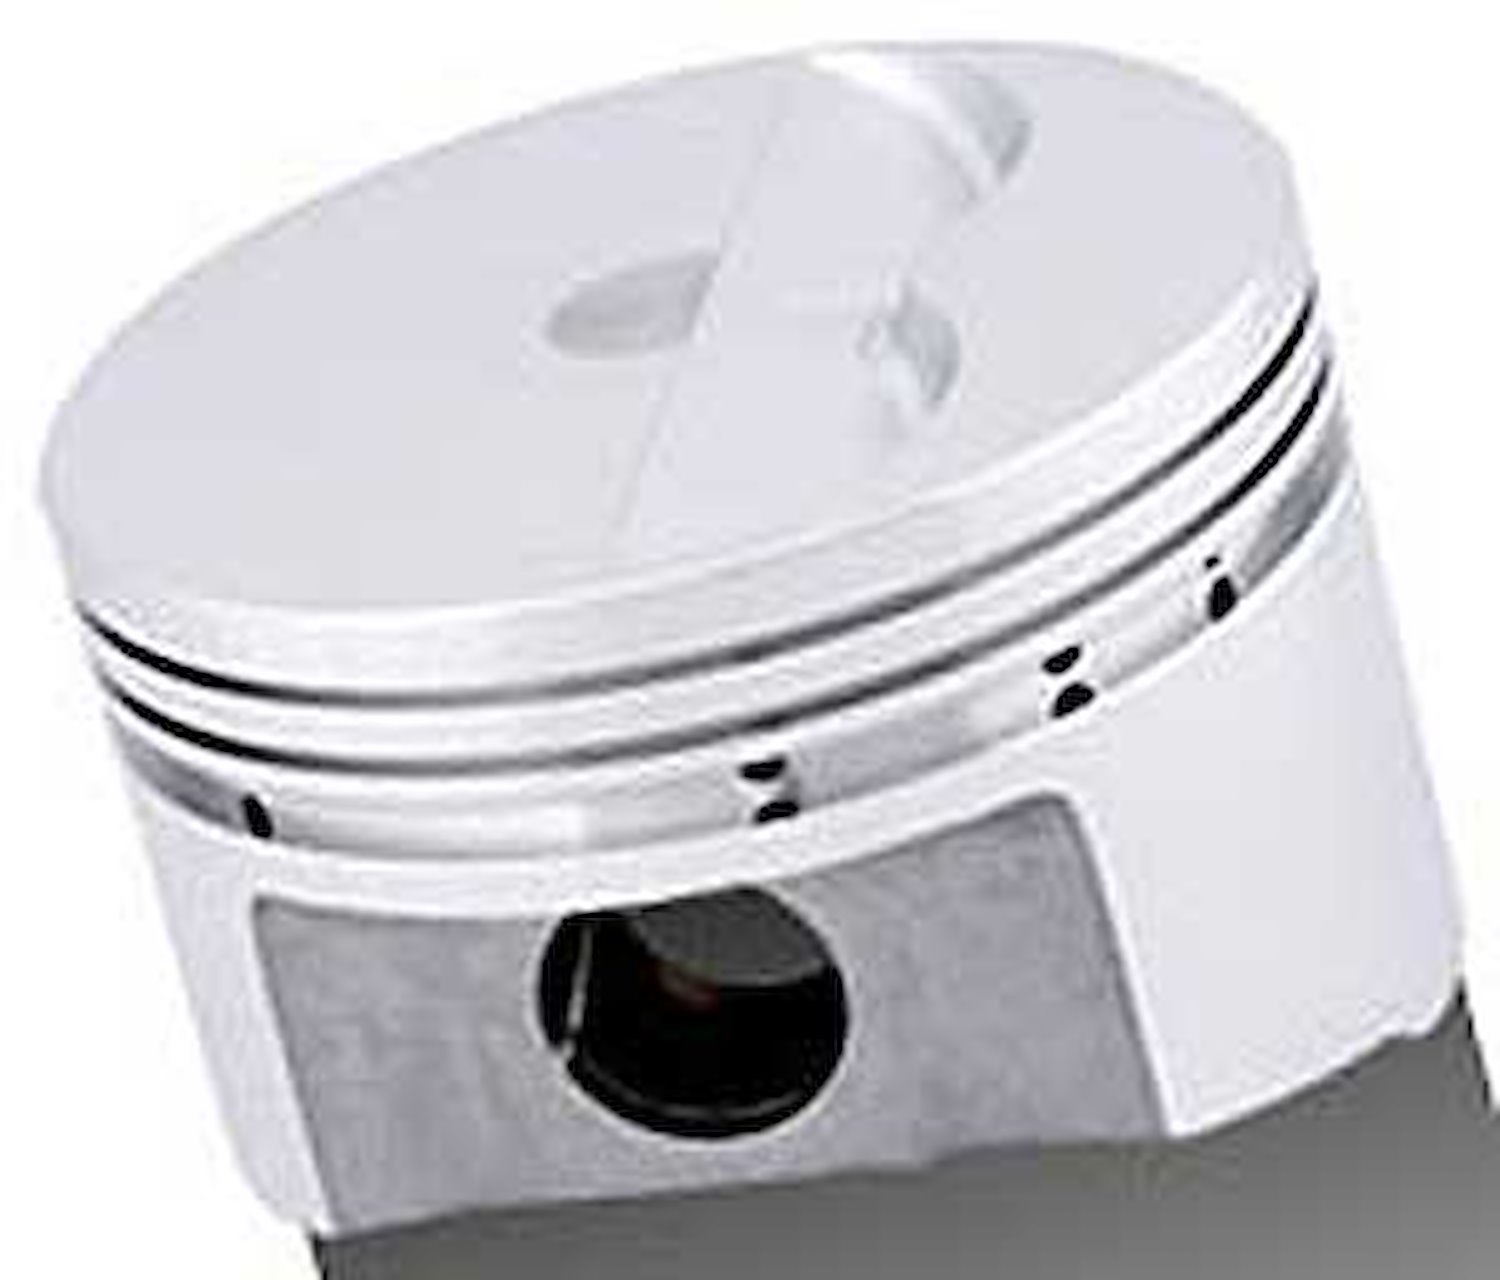 BB-Chevy Flat Top Pistons Bore 4.600"